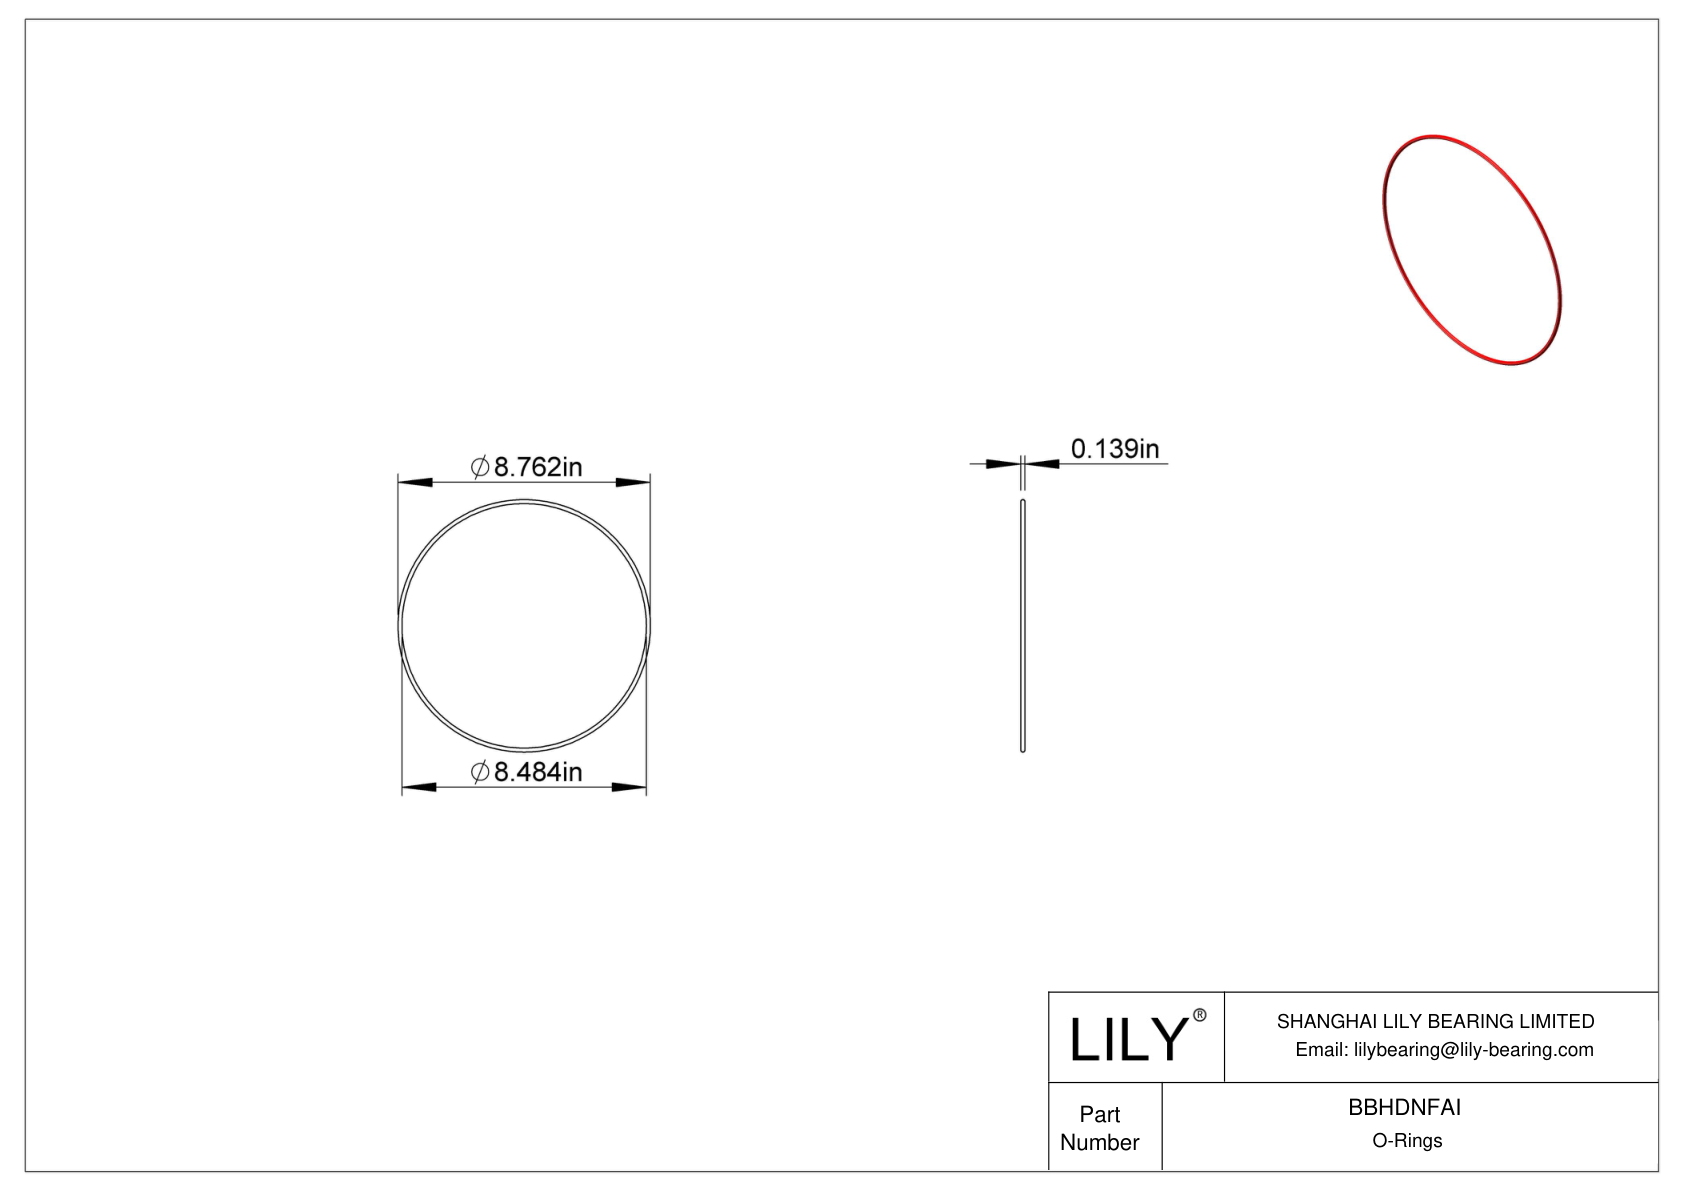 BBHDNFAI High Temperature O-Rings Round cad drawing